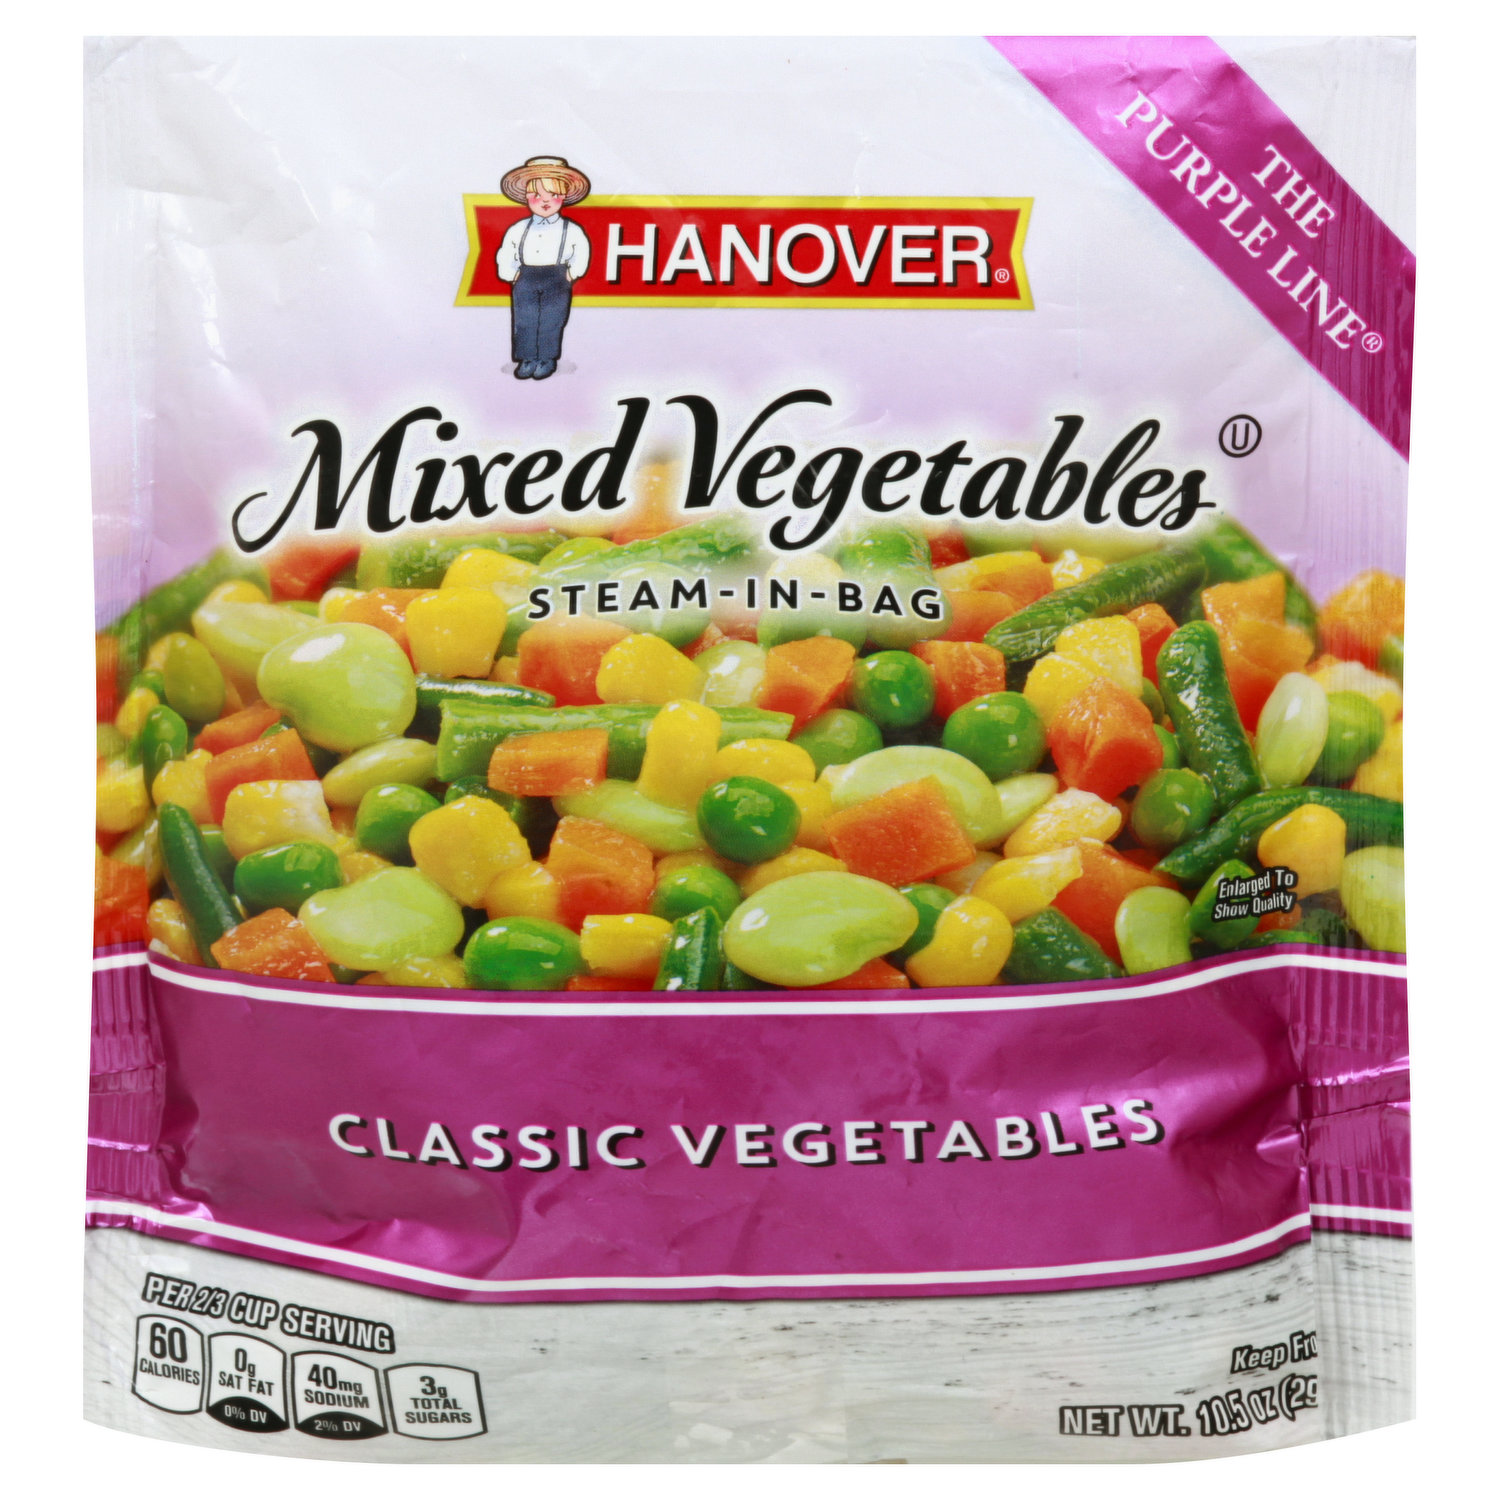 Hanover Mixed Vegetables